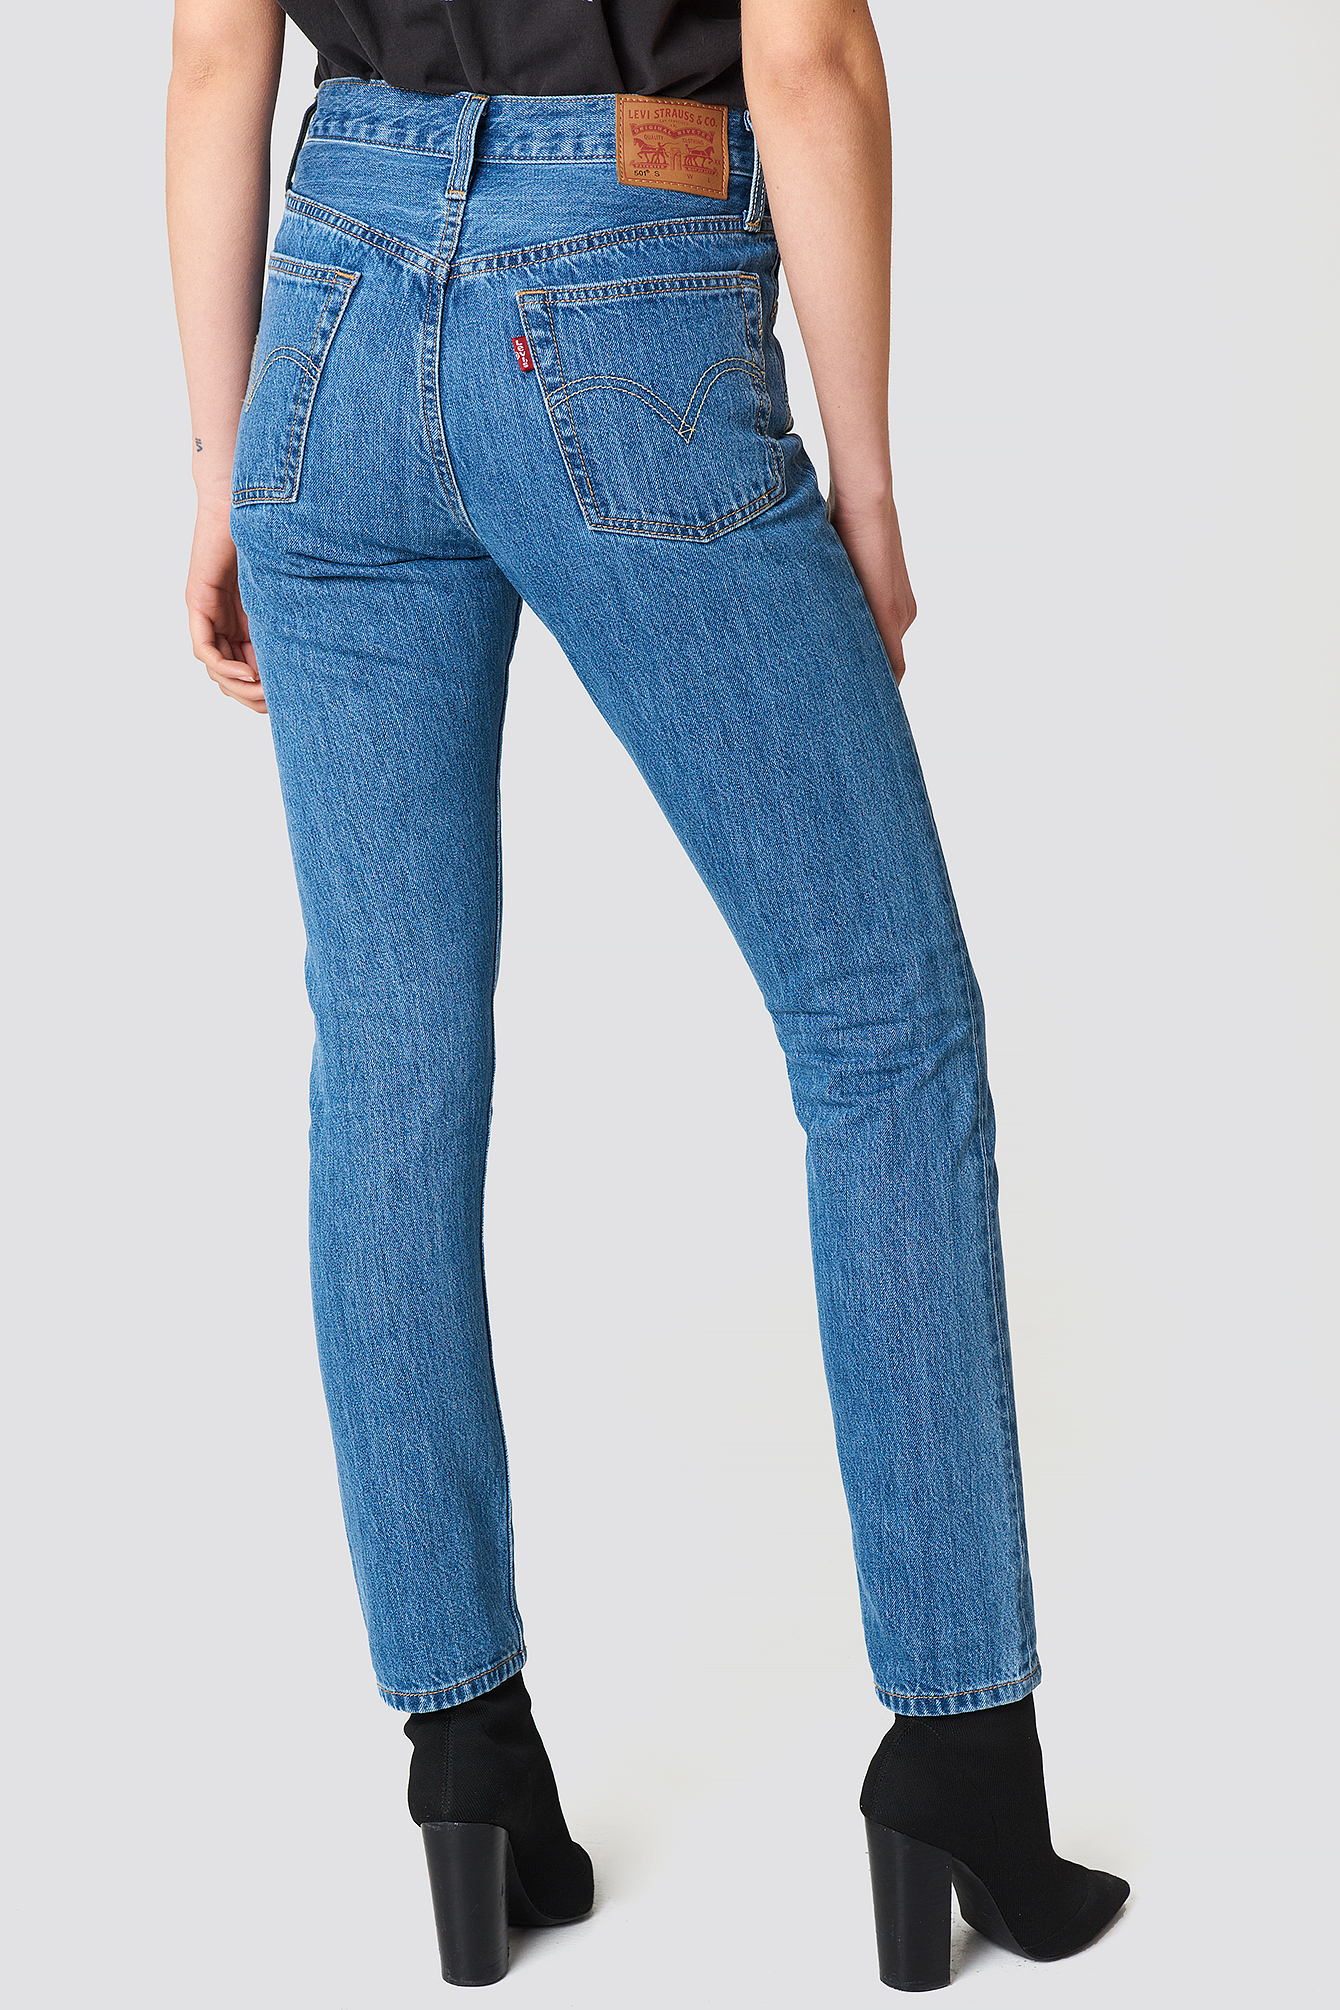 501 skinny rolling dice jeans